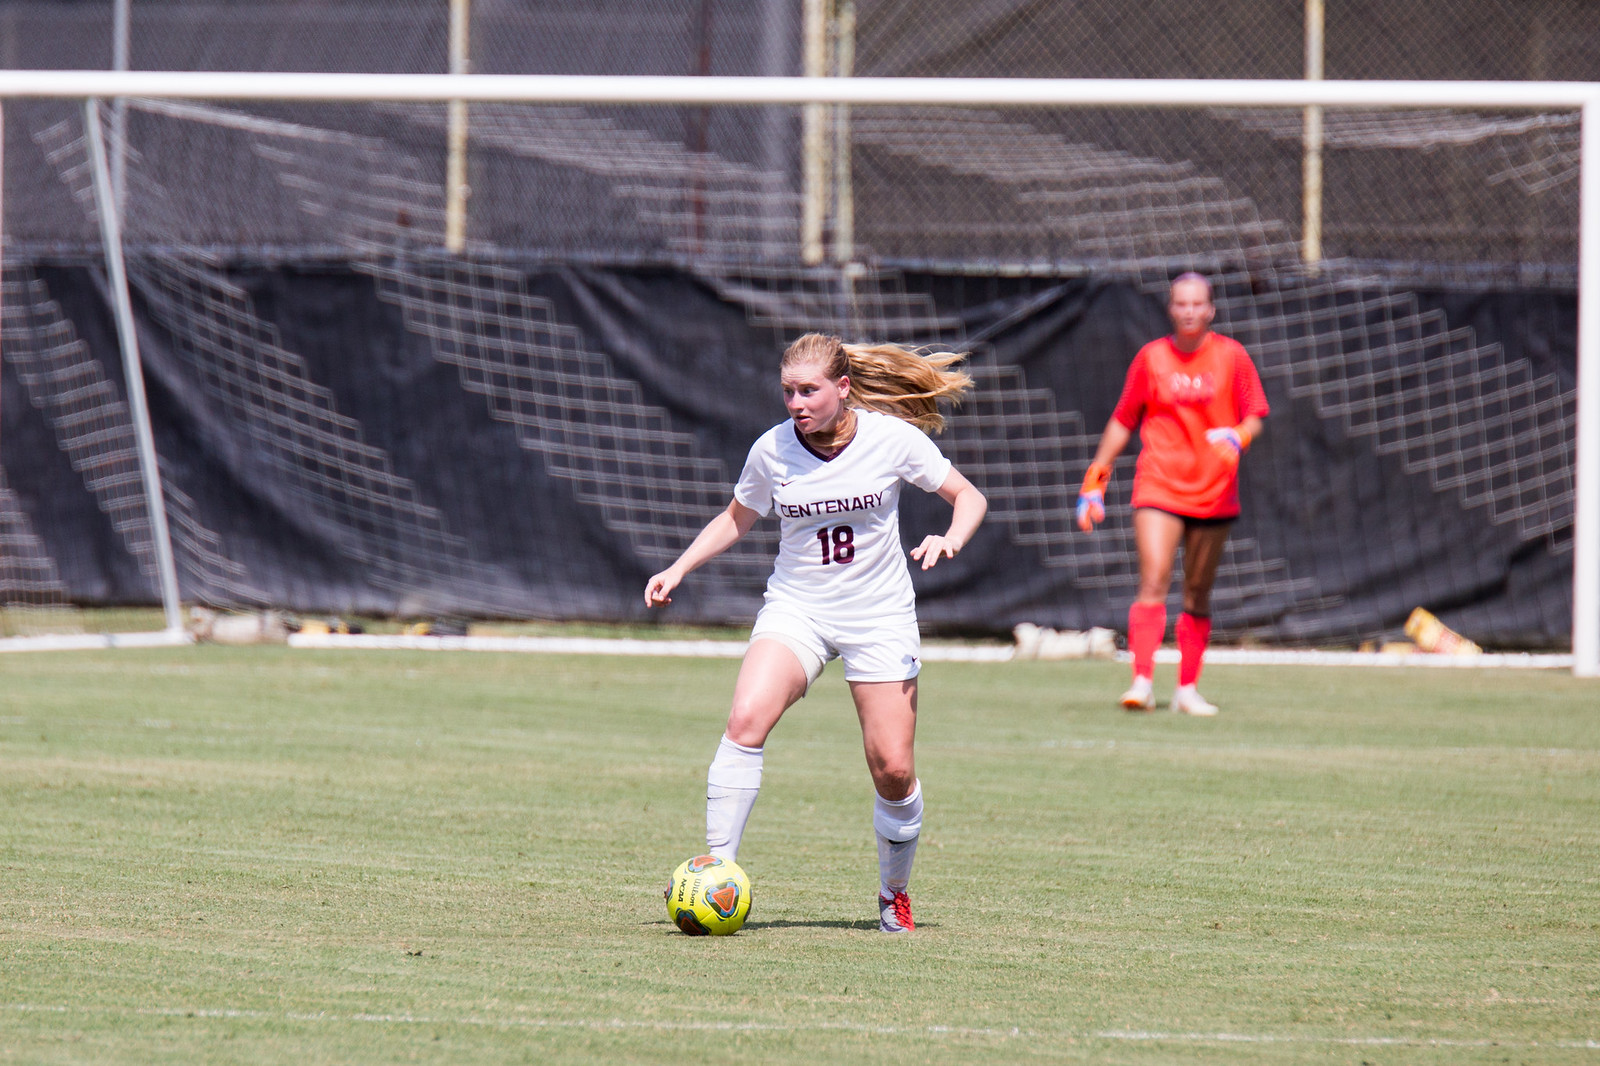 Centenary Women's Soccer Looks to remain undefeated on Road